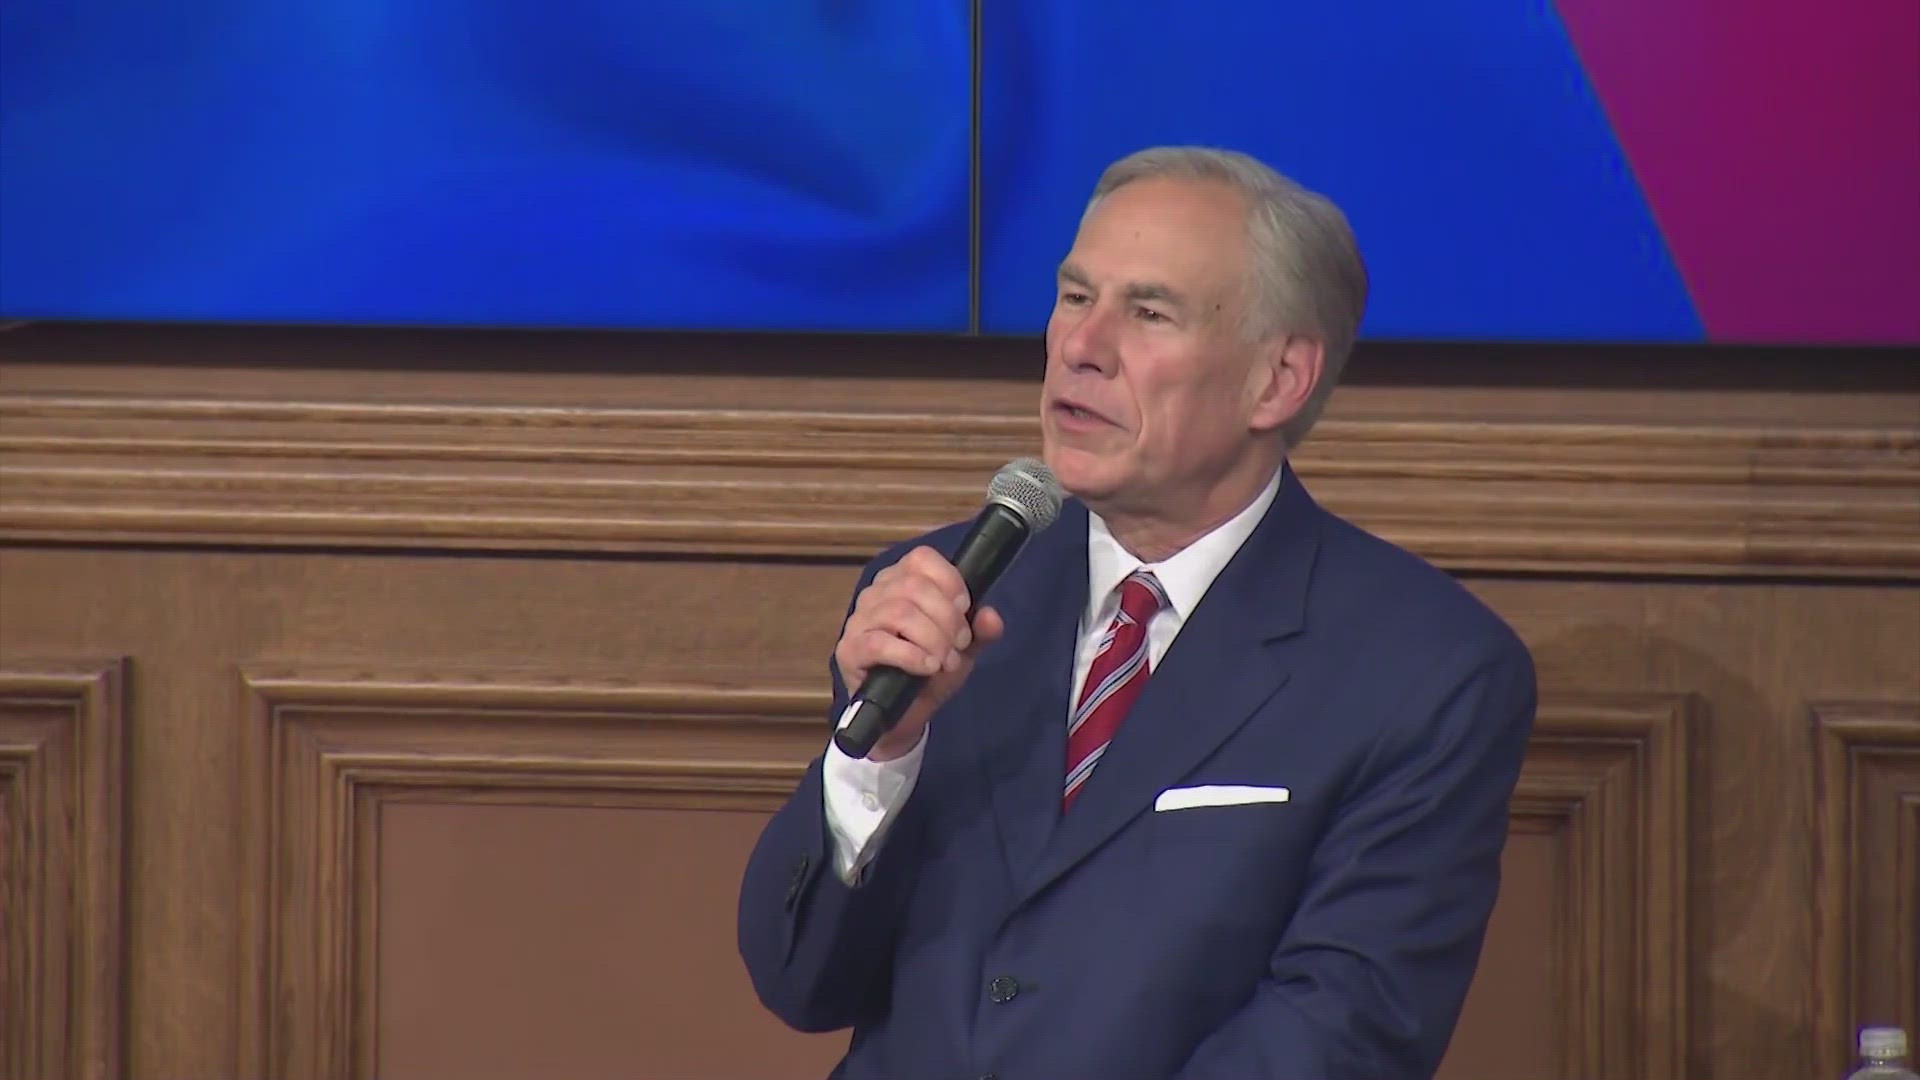 Gov. Abbott said one priority of his is school choice, which would be giving public money to parents to send their kids to the schools of their choice.